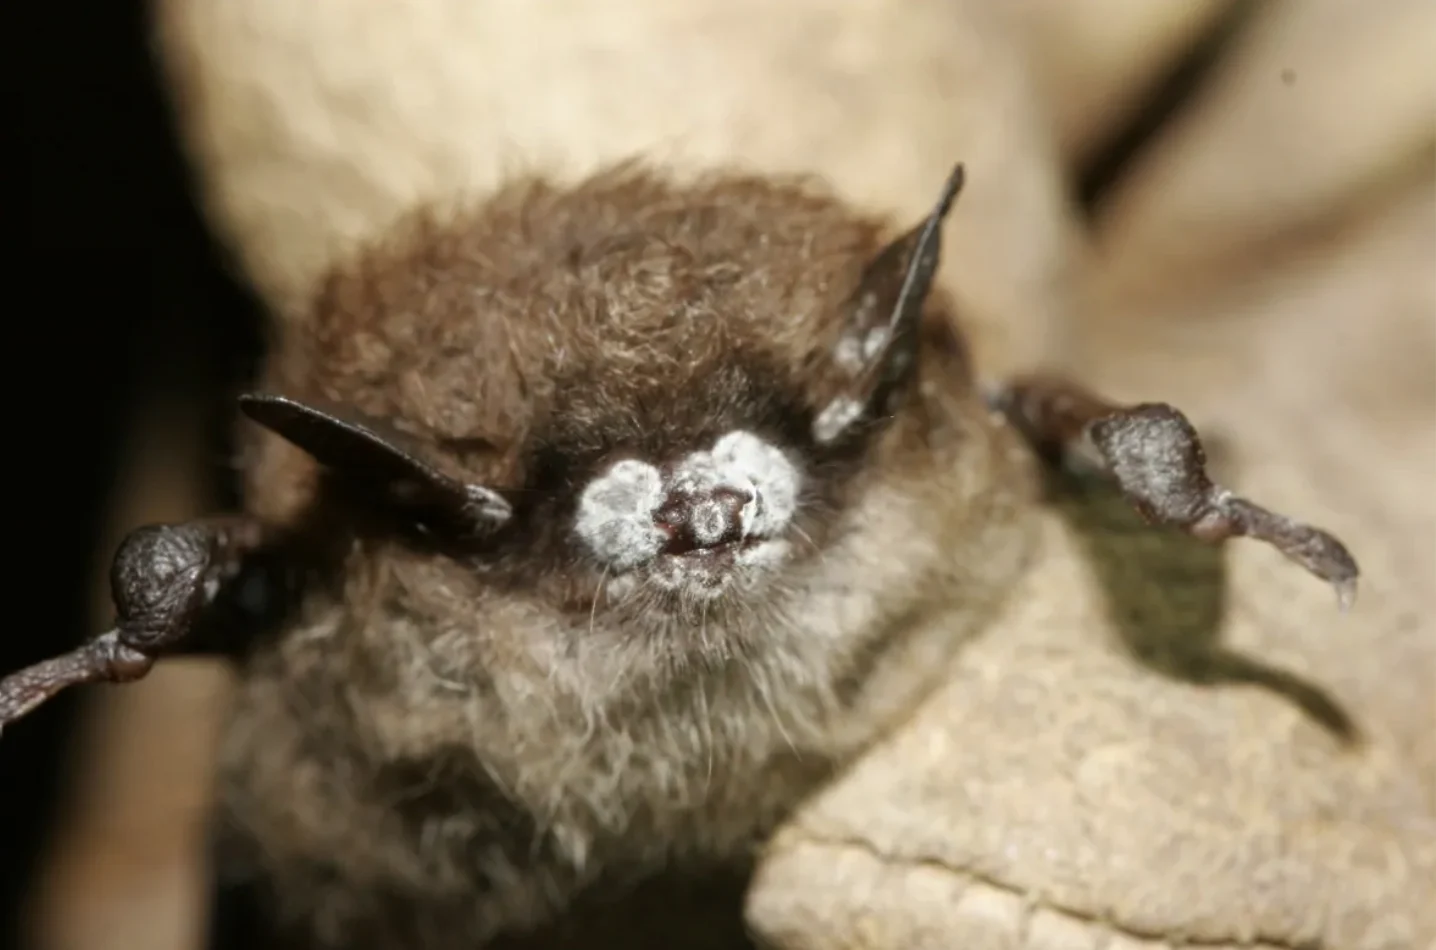 U.S. Fish and Wildlife Service: A bat with white-nose syndrome, a fungal infection that has killed millions of bats across North America. Researchers have found the fungus can weaken bats' robust immune systems and allow them to shed more viruses